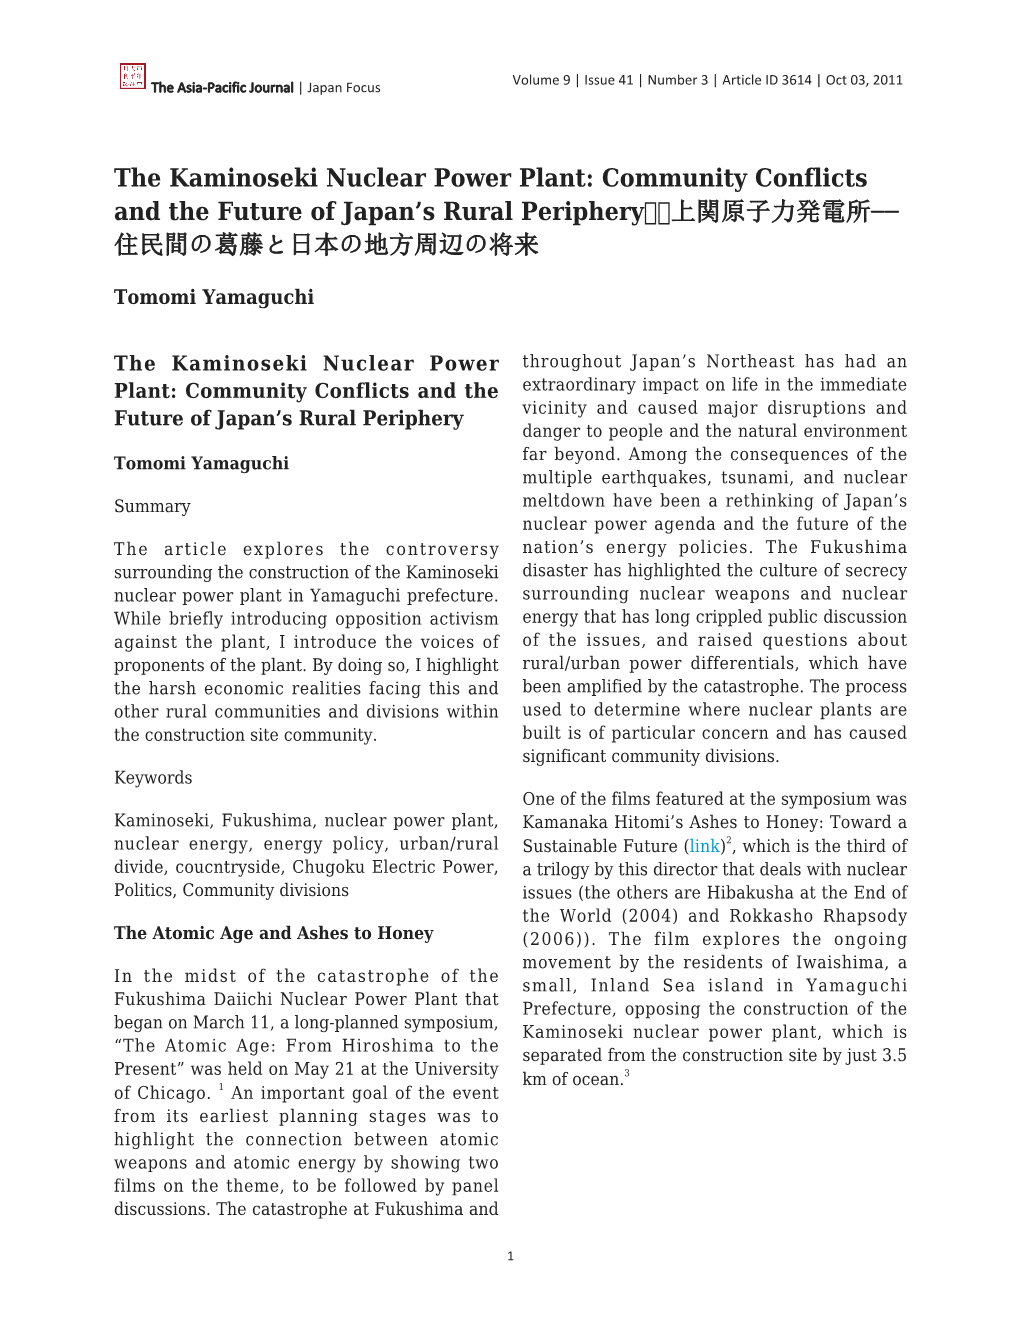 The Kaminoseki Nuclear Power Plant: Community Conflicts and the Future of Japan’S Rural Periphery 上関原子力発電所−− 住民間の葛藤と日本の地方周辺の将来